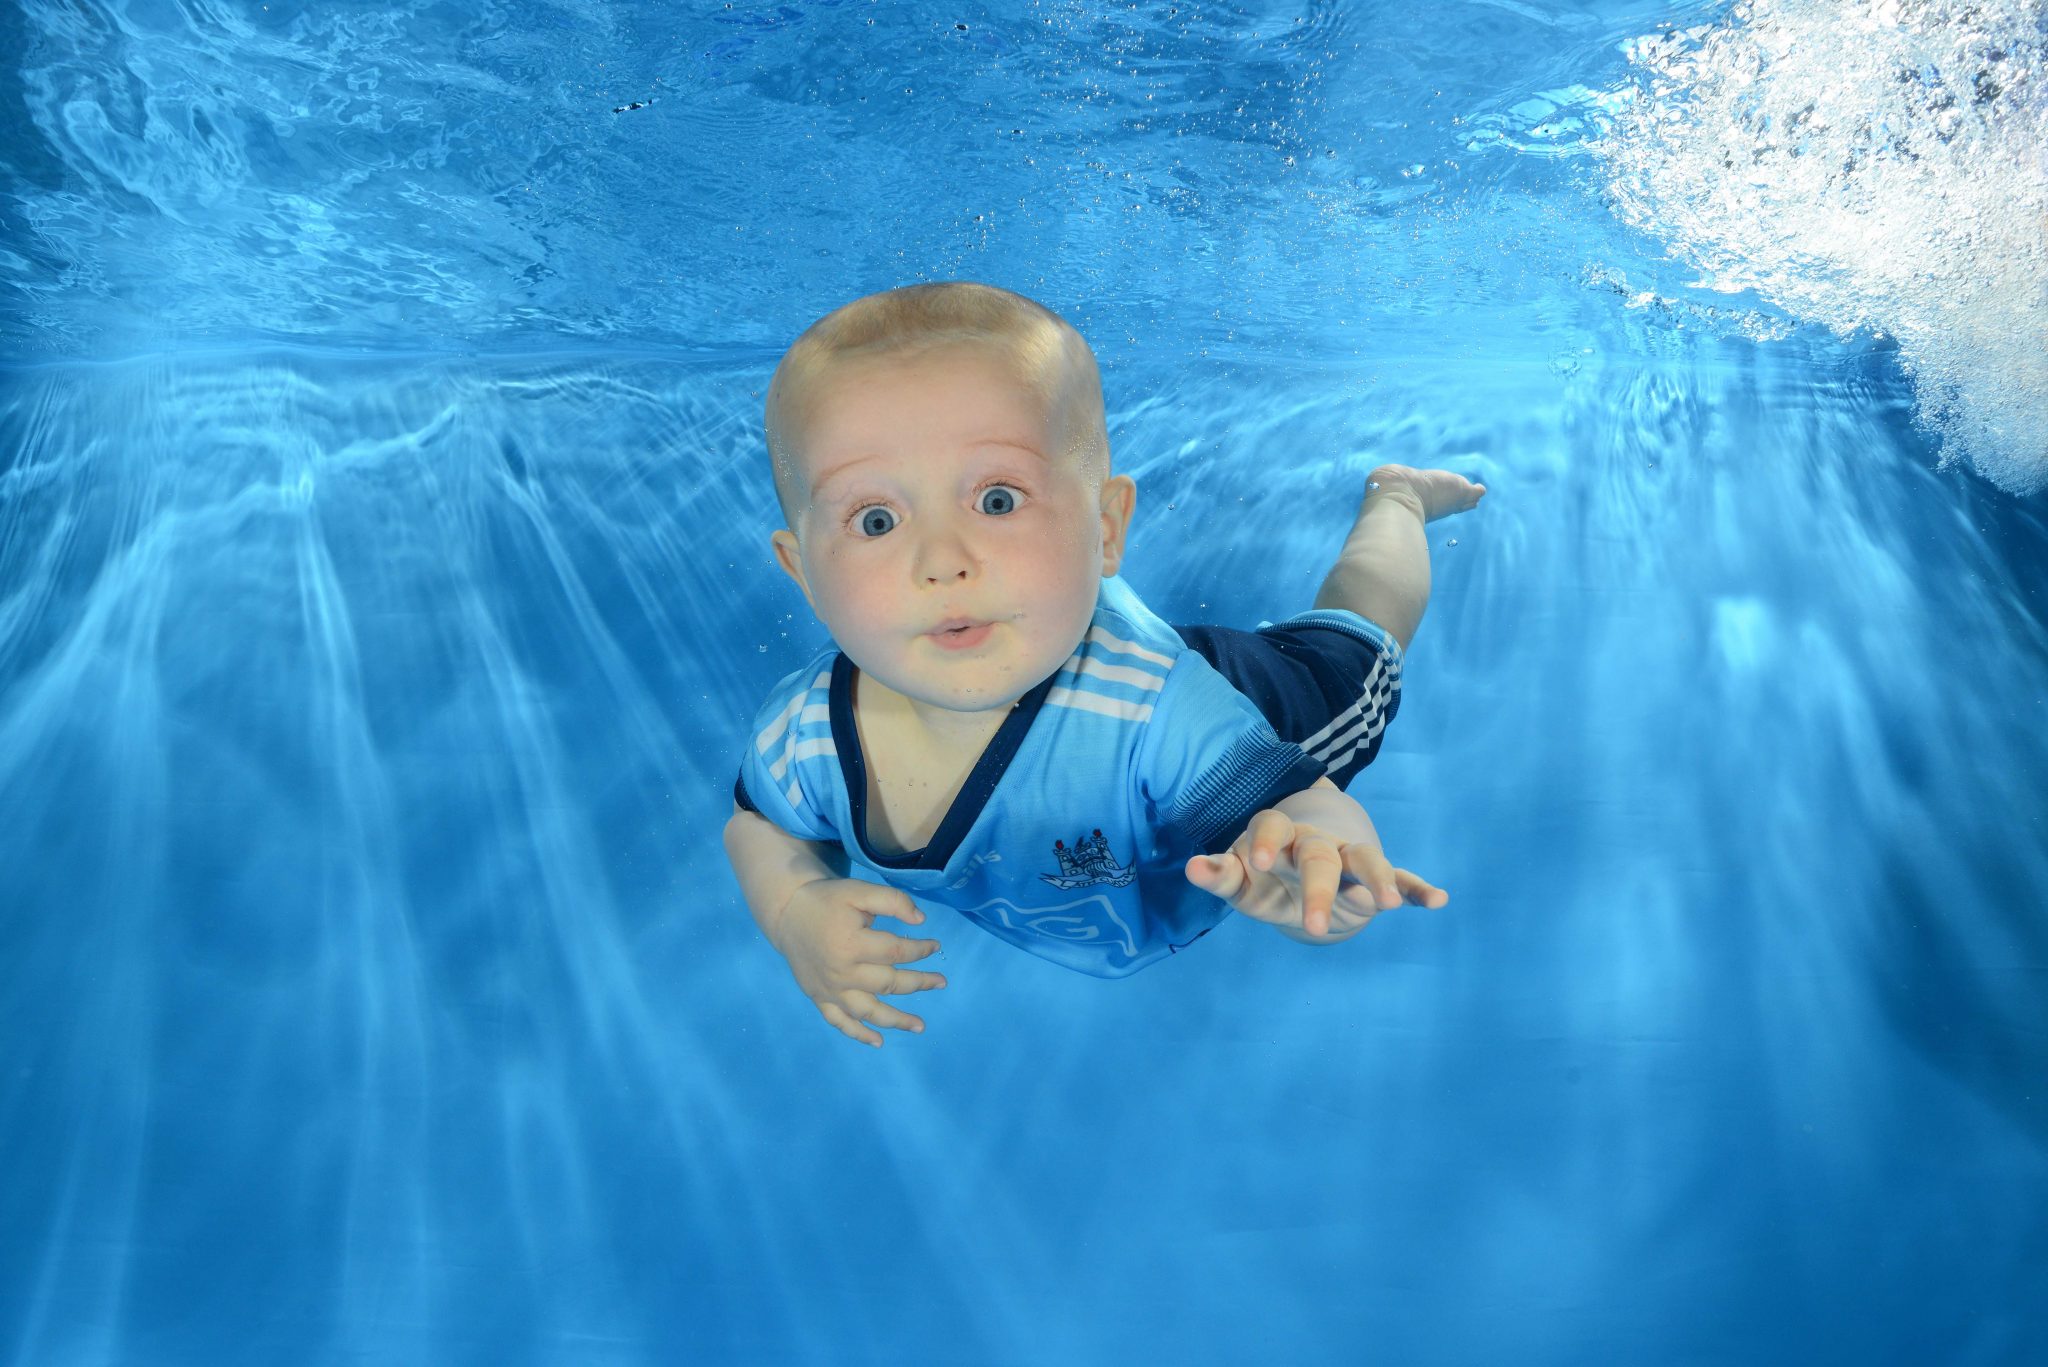 Water Babies photographs ‘water babies in blue’ and they are just too cute